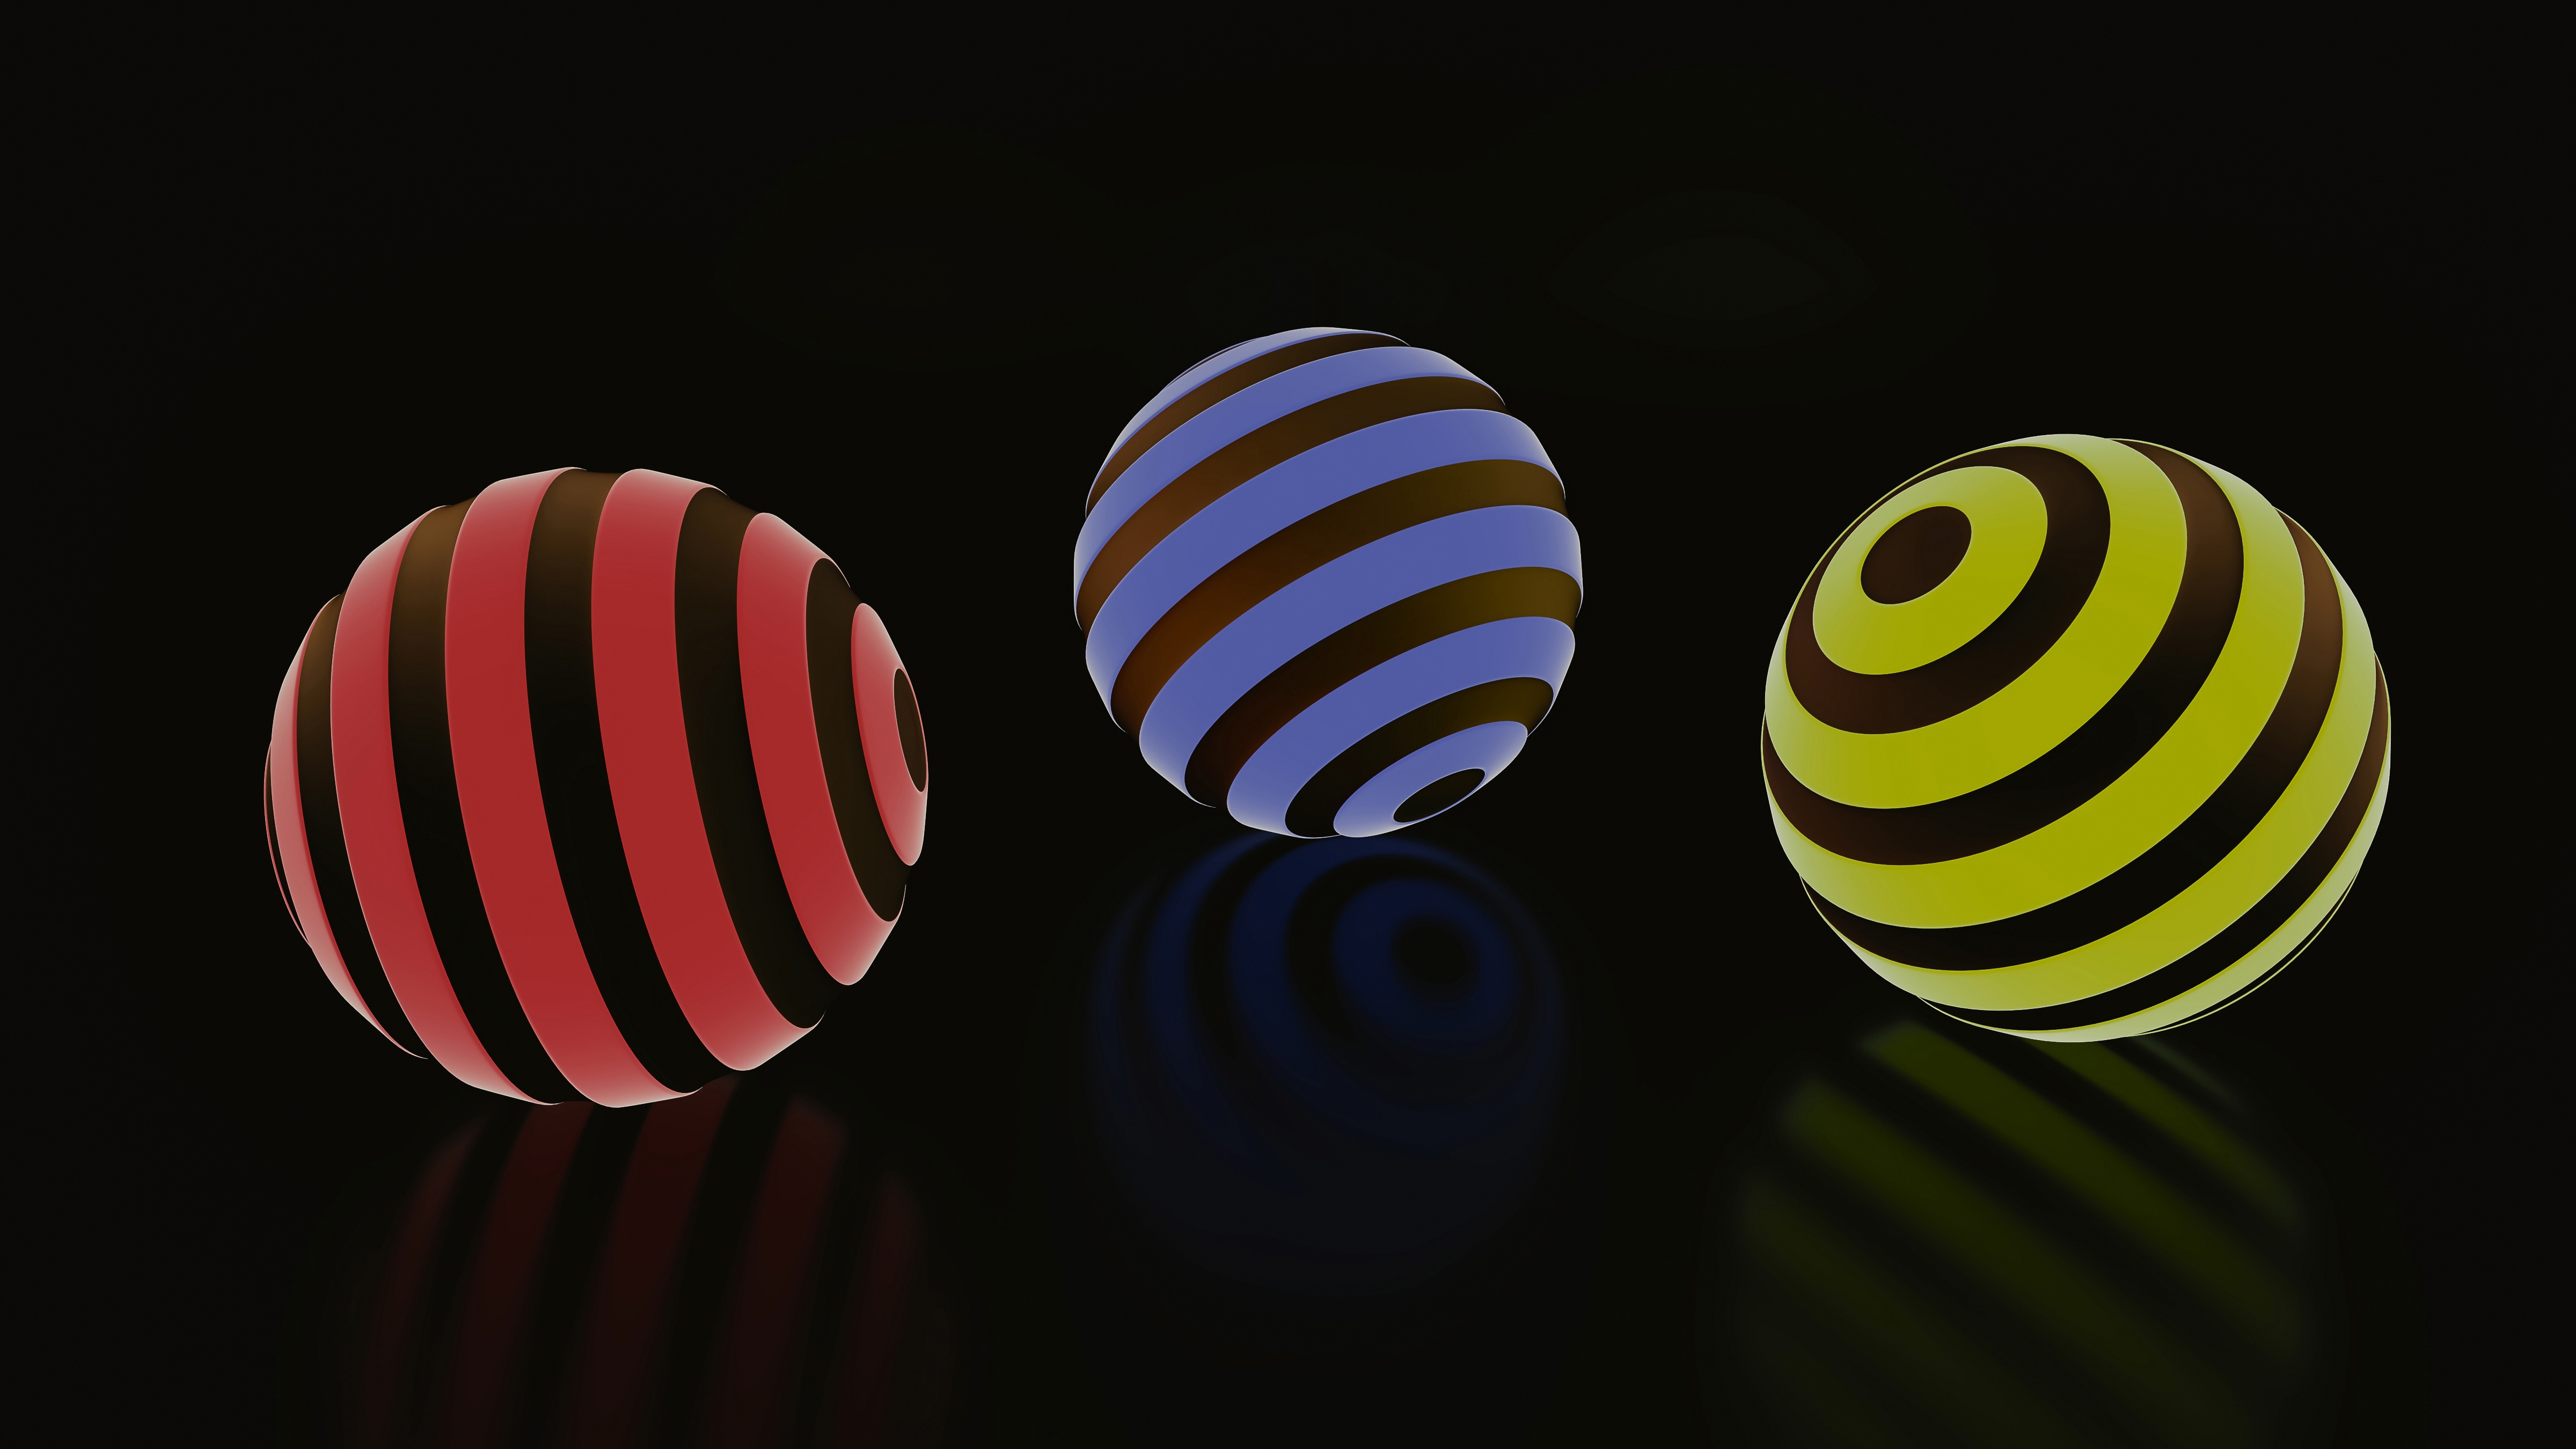 142314 download wallpaper 3d, balls, stripes, streaks, ball, glow screensavers and pictures for free